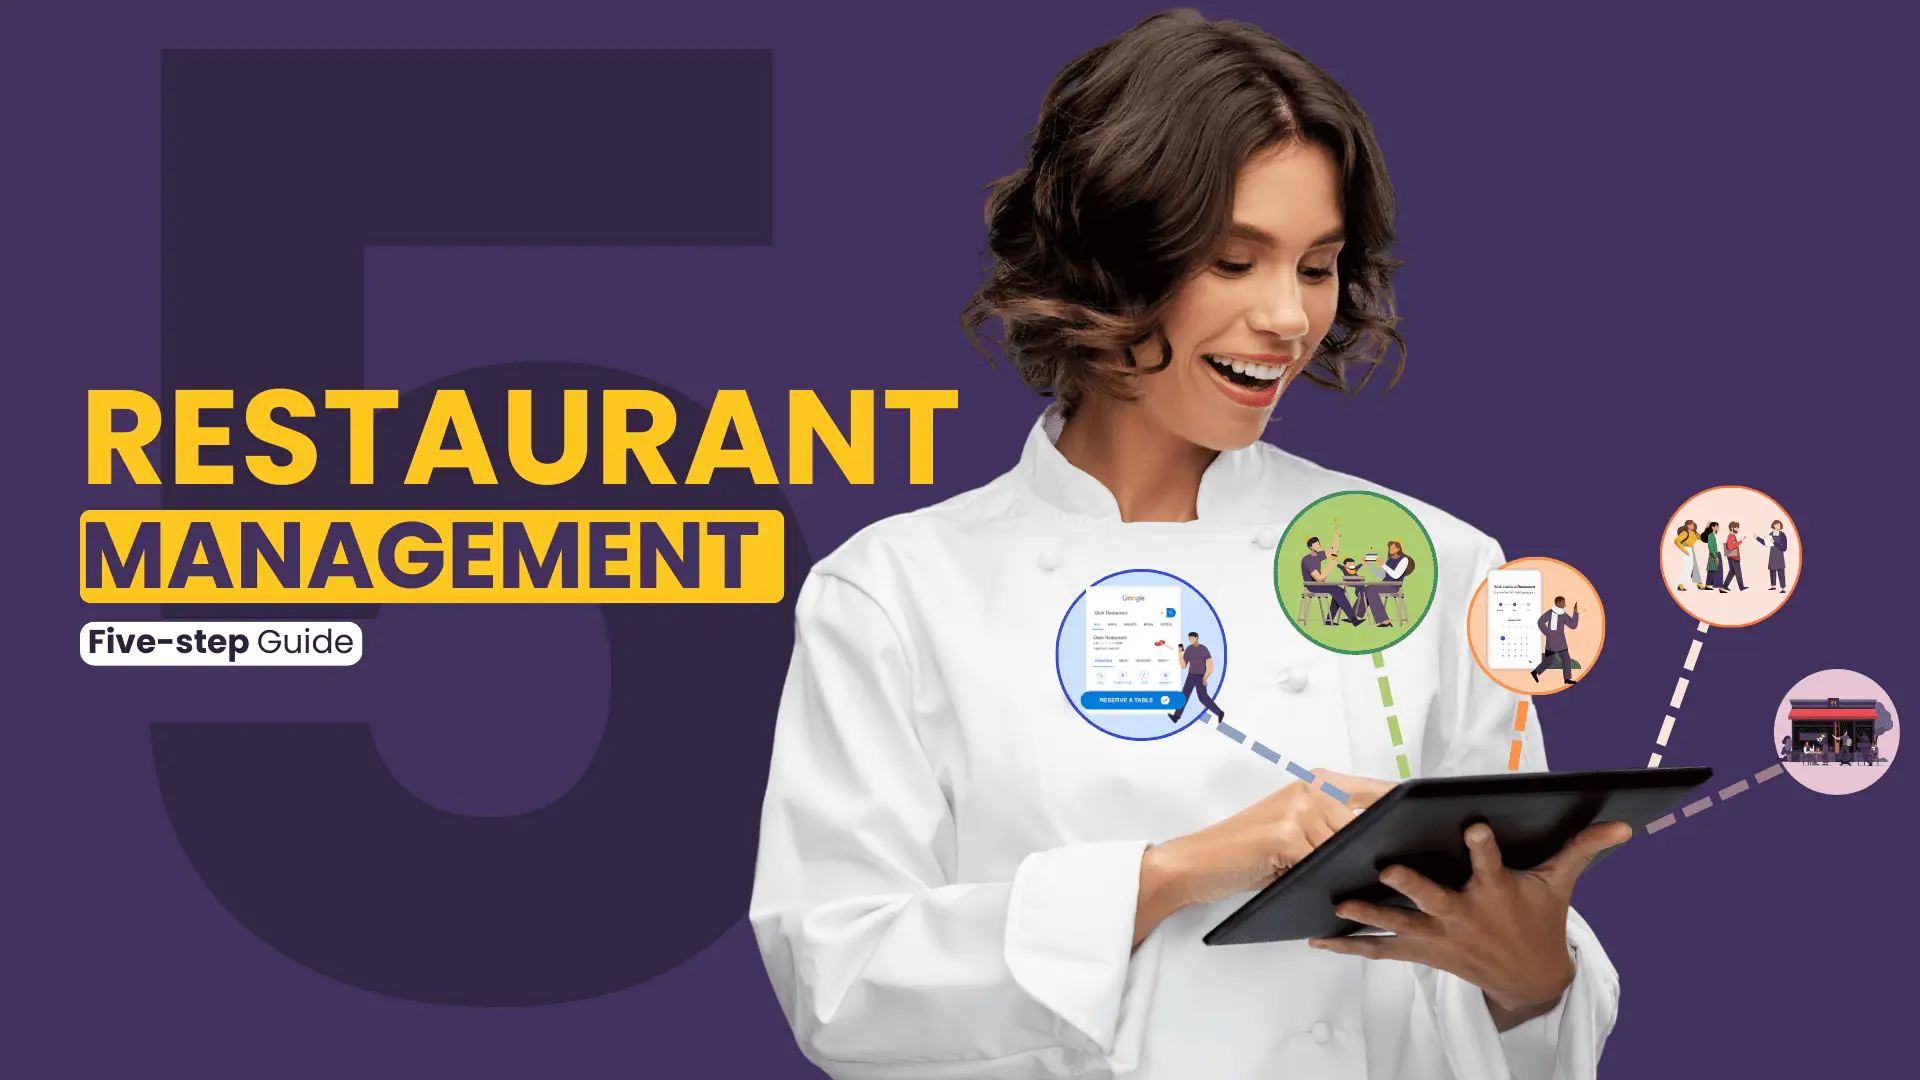 Restaurant Management: 5-step guide to effectively manage your restaurant